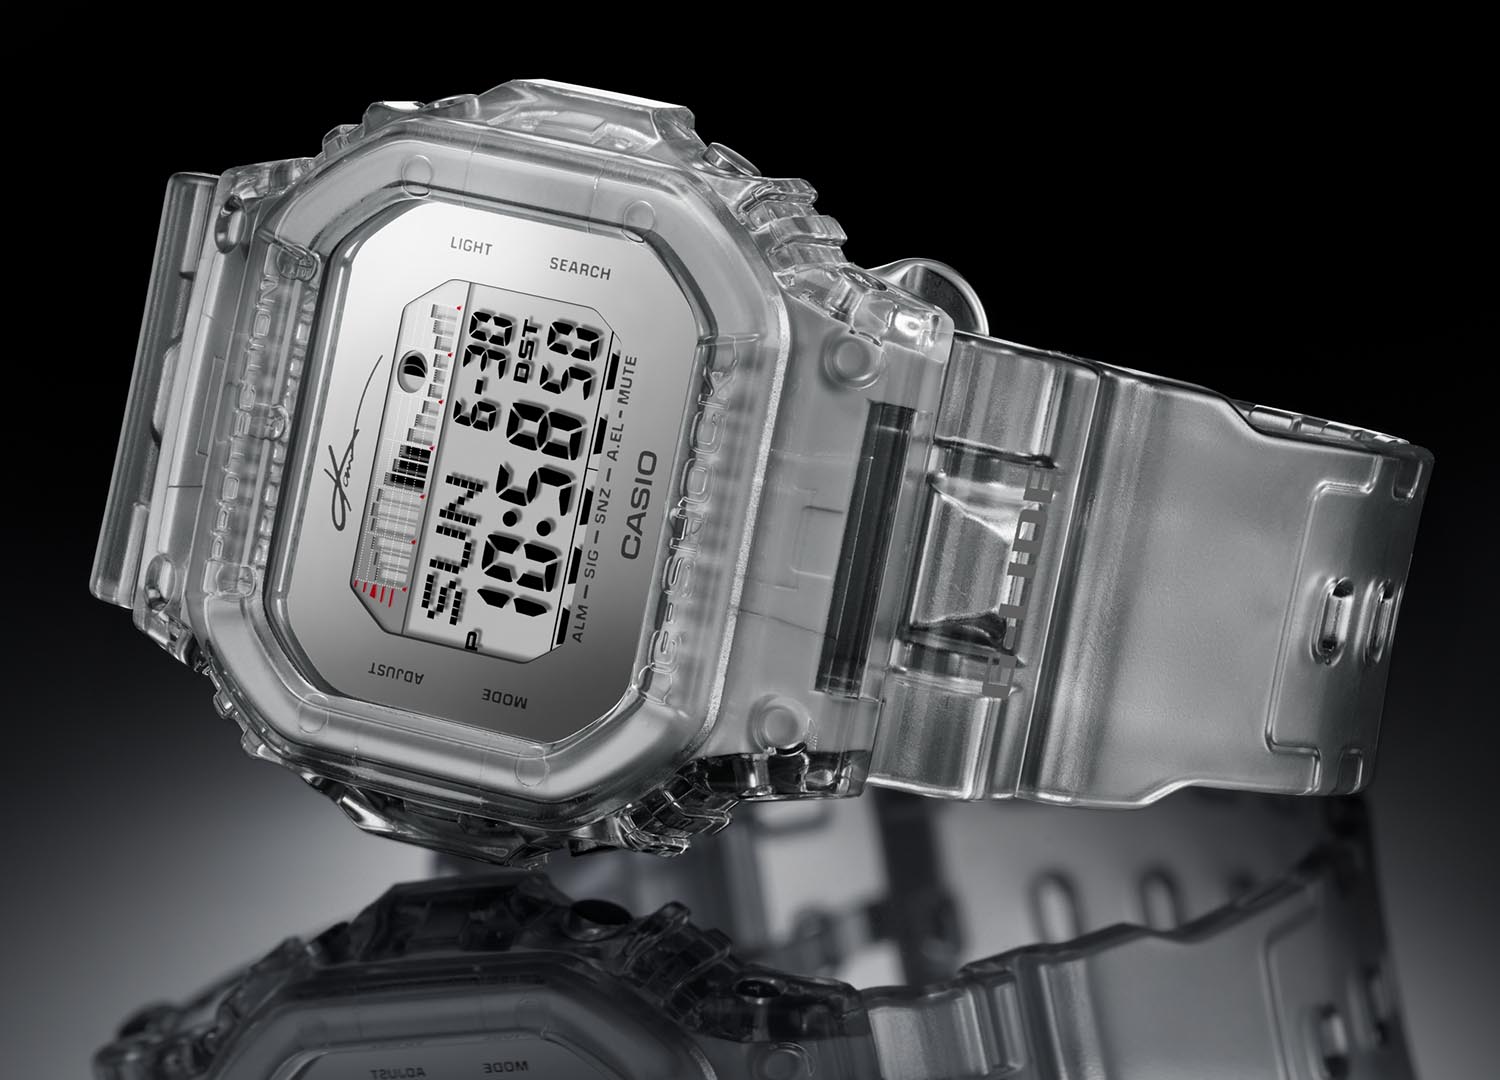 Casio G Shock Announces Latest G Lide Model In Collaboration With Pro Surfer Kanoa Igarashi Casio Usa